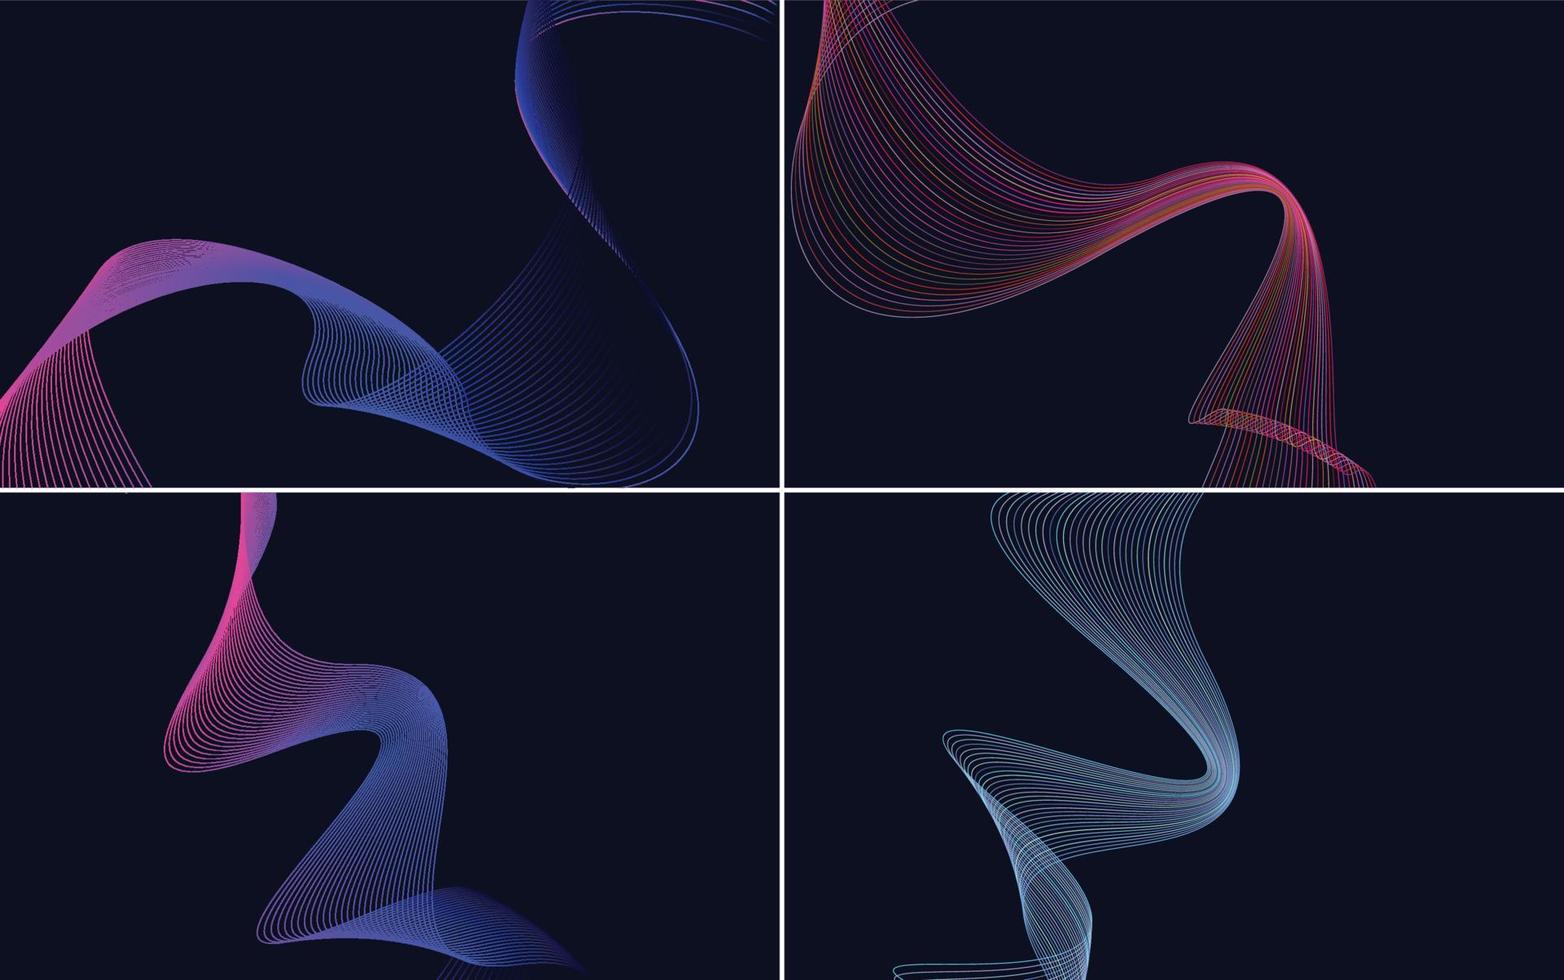 Enhance your designs with this set of 4 vector backgrounds